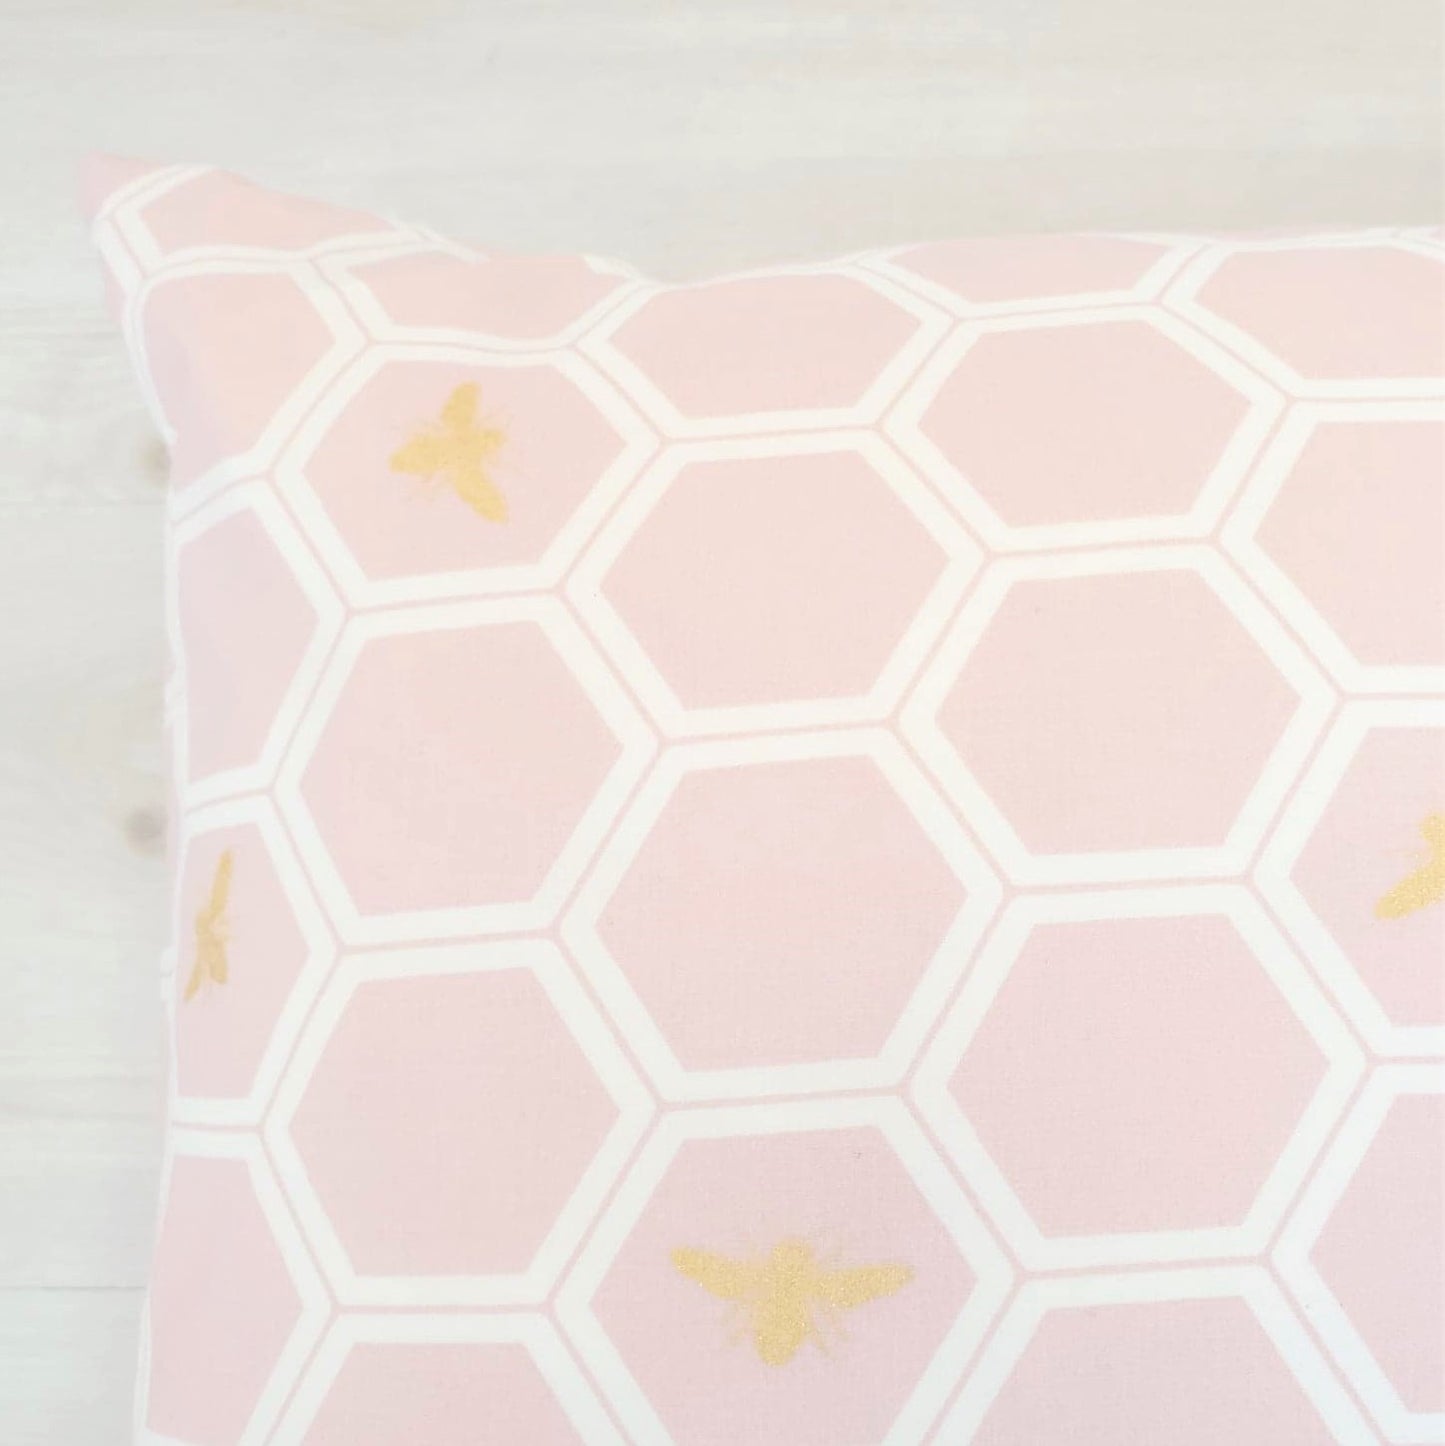 Organic Accent Pillow Cover with Metallic Gold Bees & Honeycomb